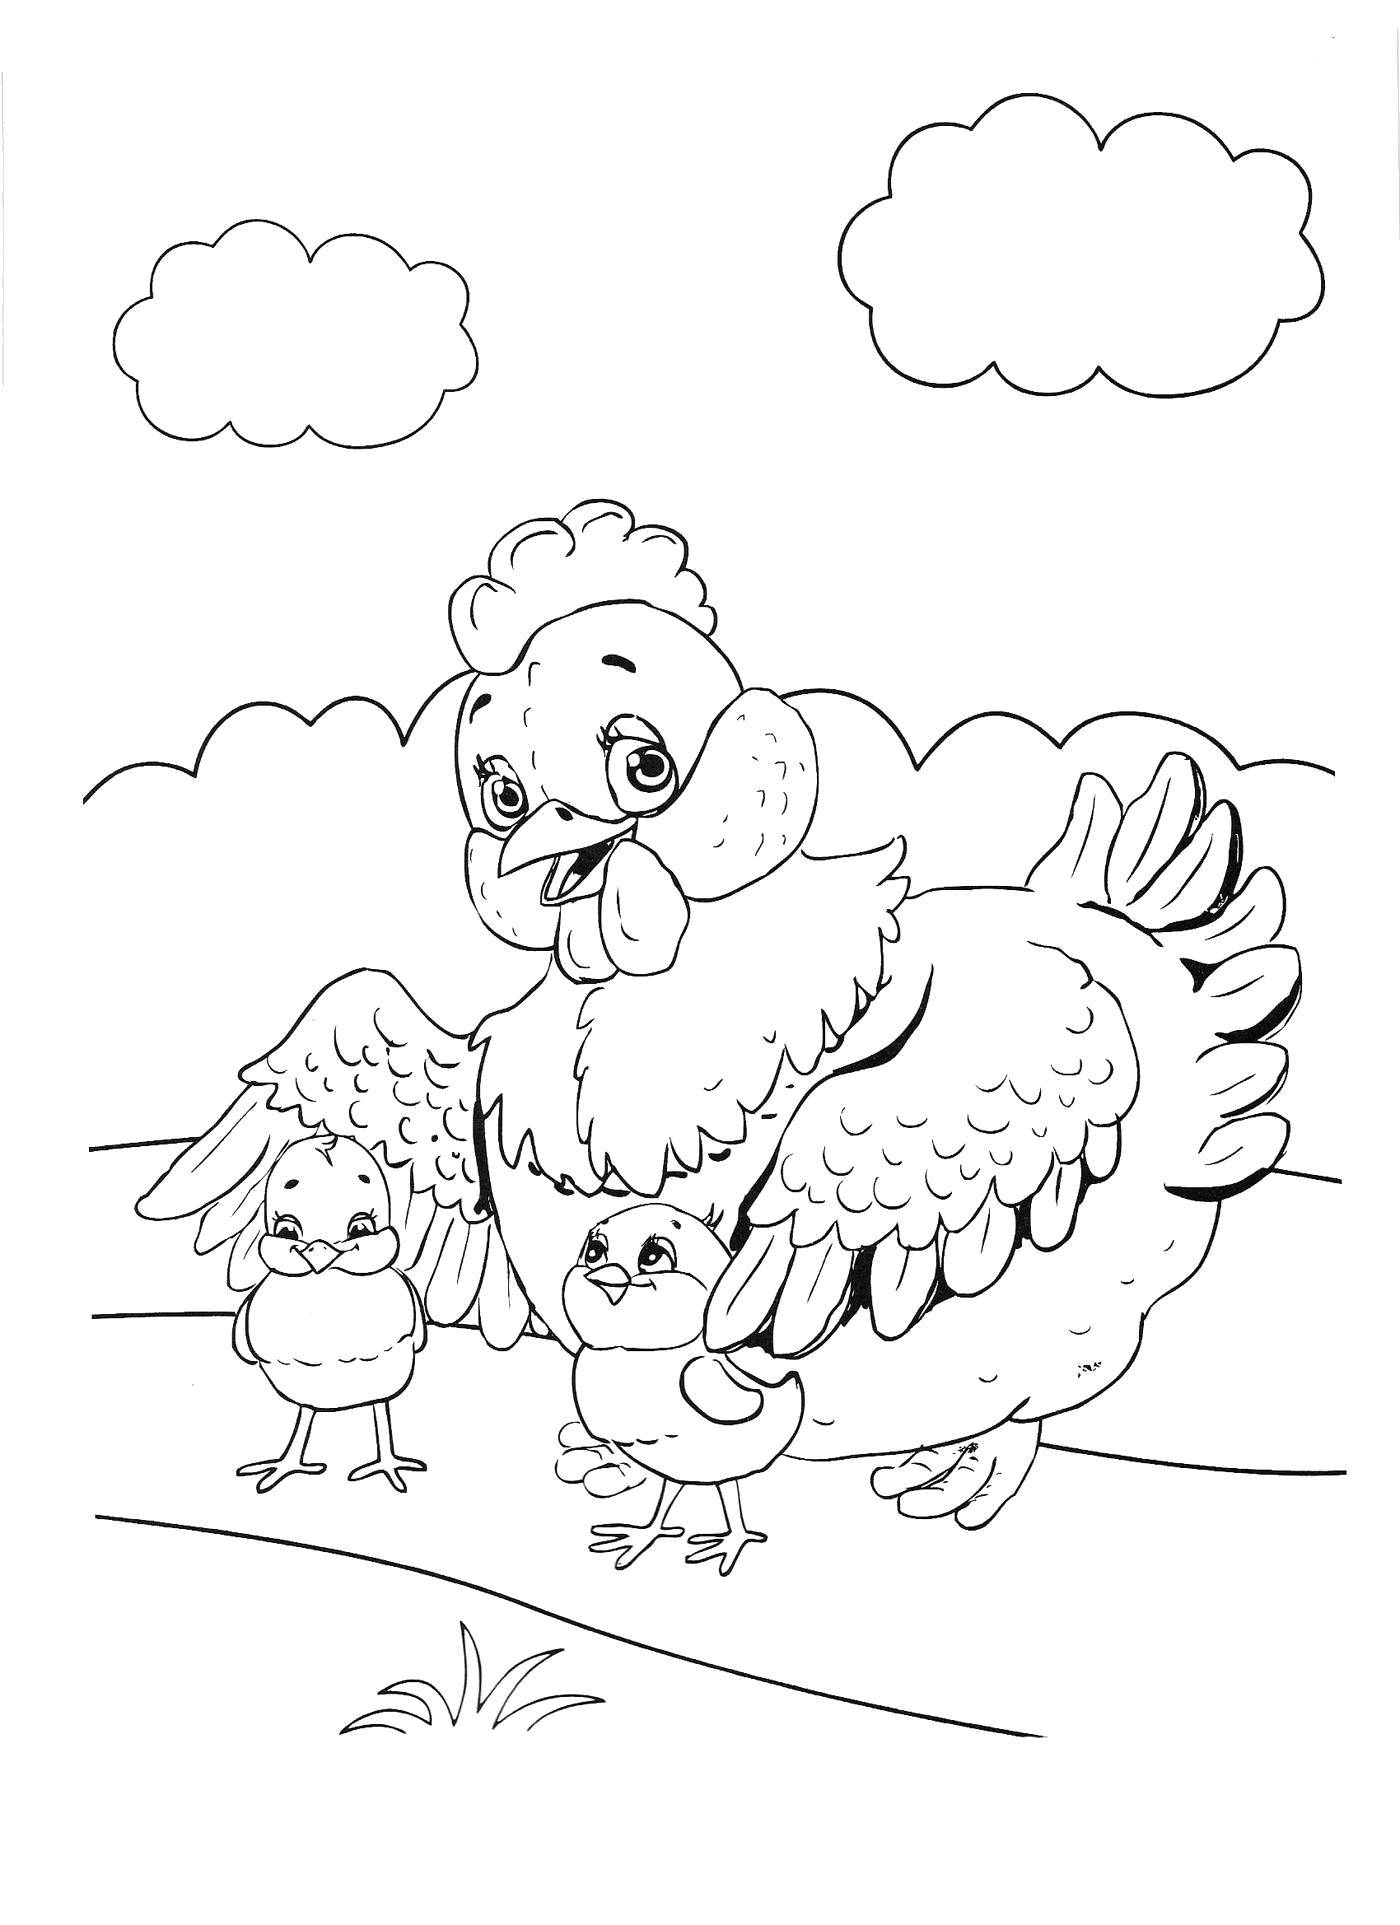 Coloring Hen and chickens. Category birds. Tags:  Poultry, chicken.